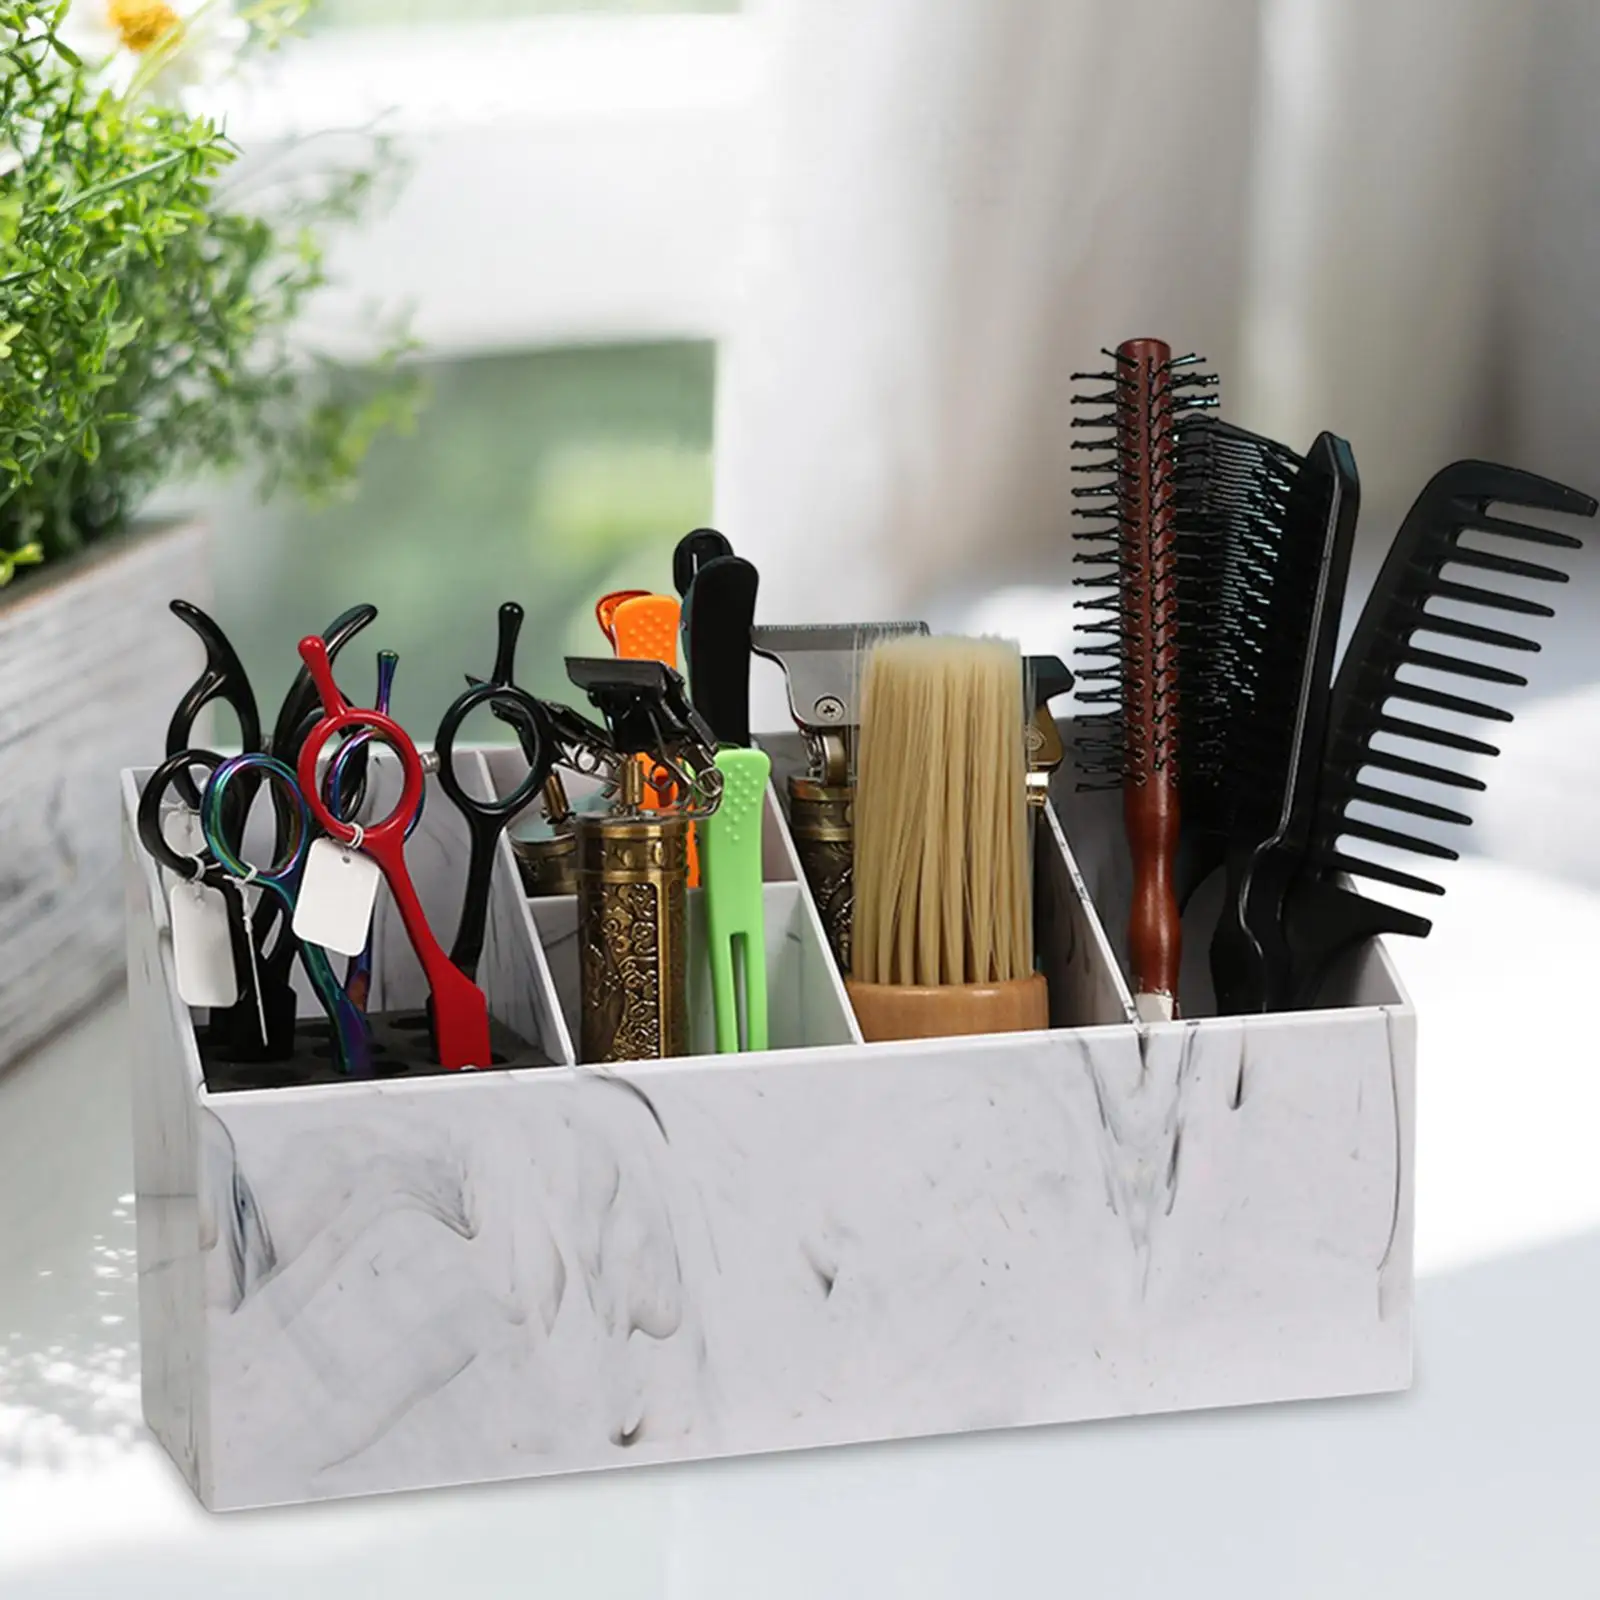 Barber Scissors Holder Box Brushes Storage Rack Barber Shear Holder Box for Brushes Hairstyling Combs Clips Hairdressers